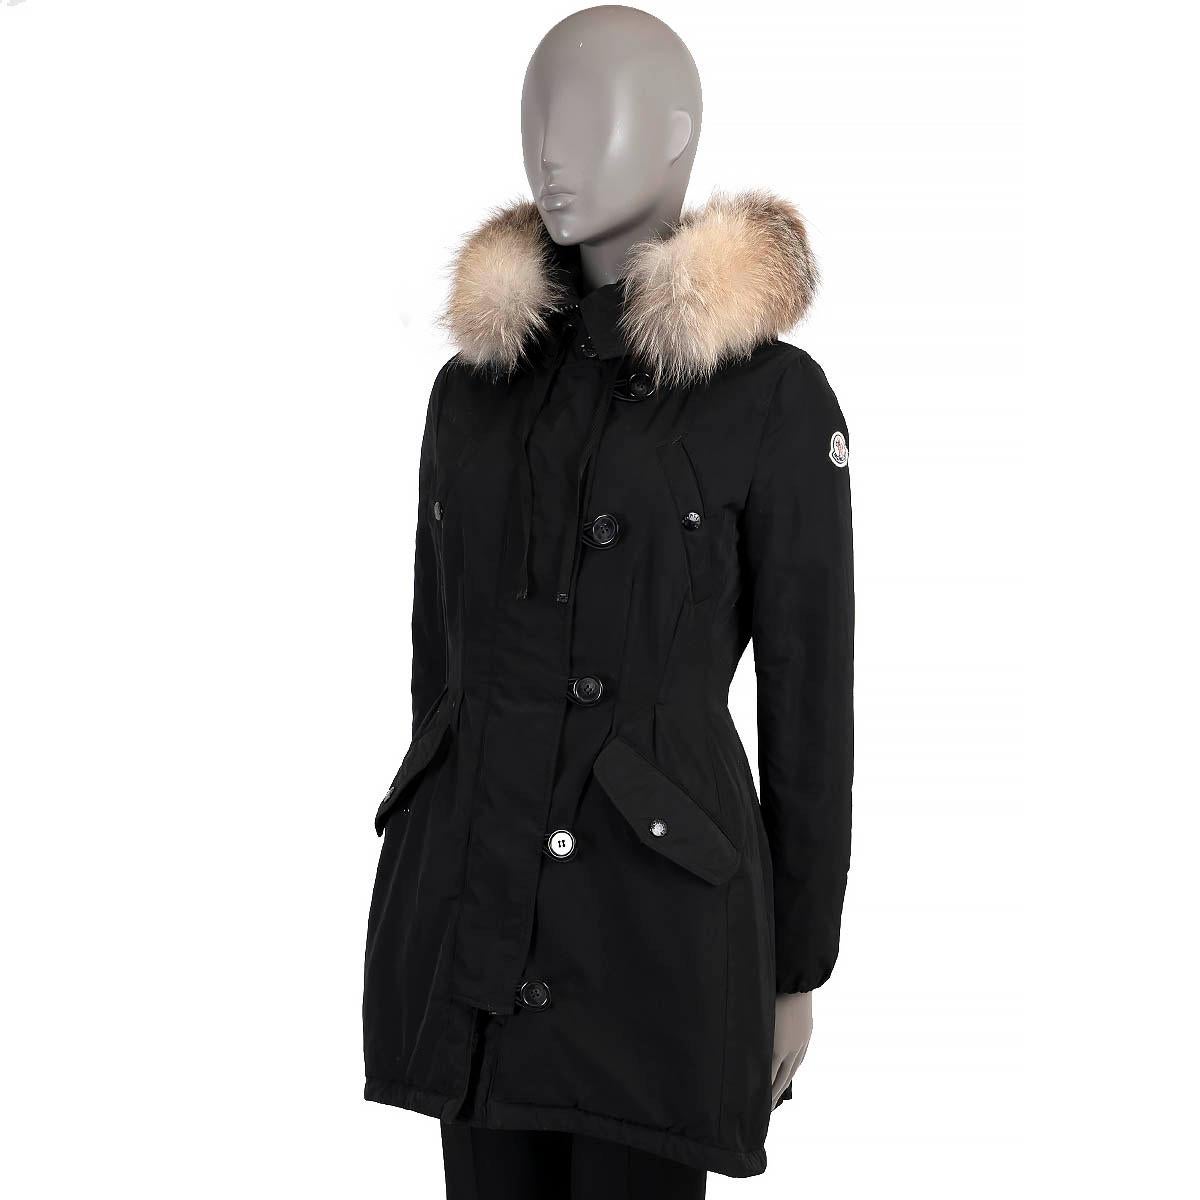 100% authentic Moncler Aredhel utilitarian parket in black water repellent polyester (70%) and cotton (30%). Features a drawstring hood with detachable fox fur trim,  two snap-button pockets at the chest and to snap-button flap pockets at the waist.